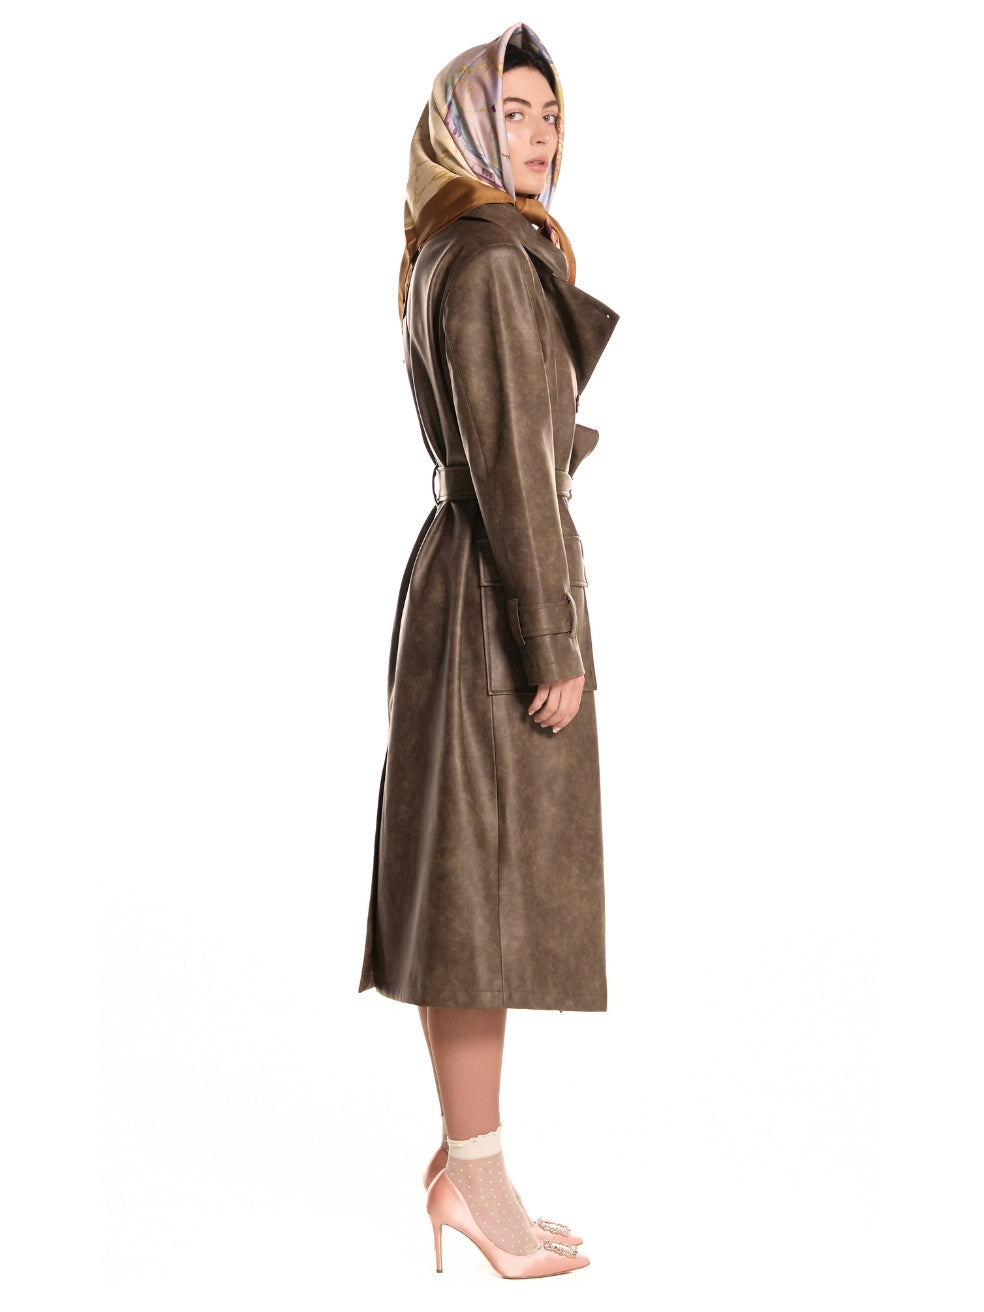 Gina trench coat made in canada consciously made outerwear FREED vintage brown vegan leather